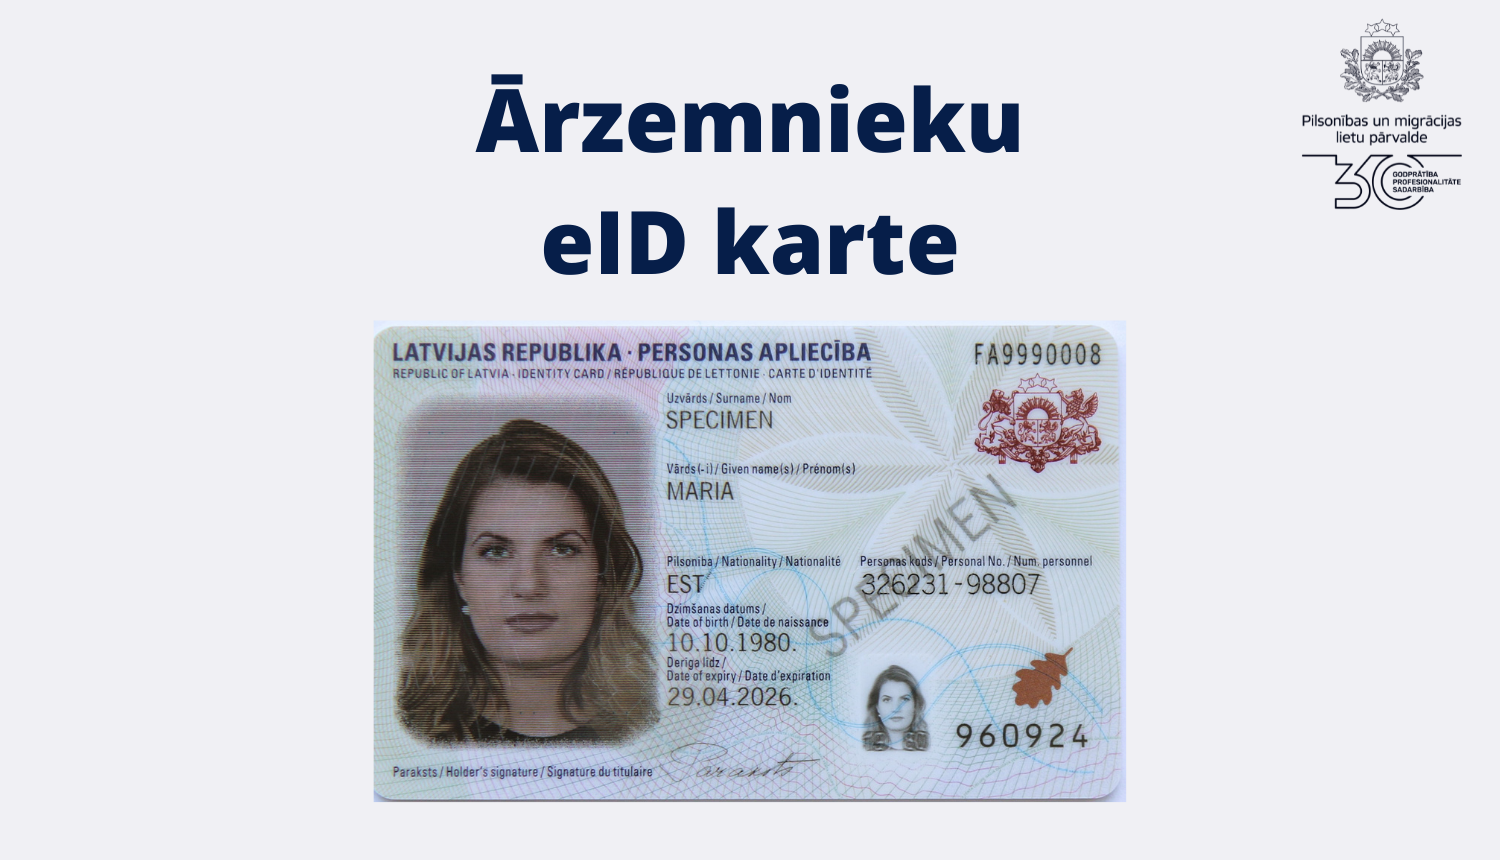 eID card – now a compulsory document for Latvian citizens living abroad -  Baltic News Network